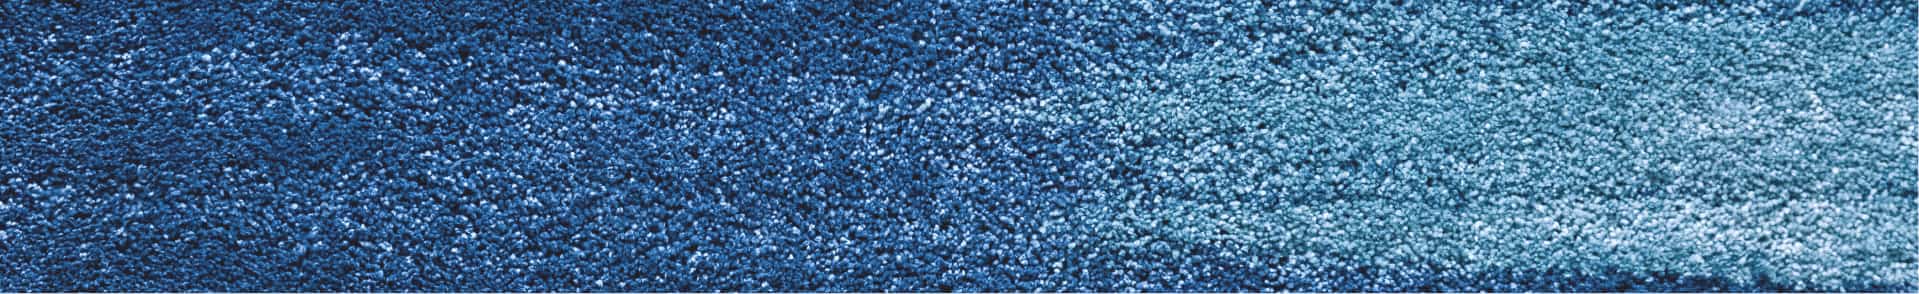 Denim Enzyme | The role of enzymes in the textile industry